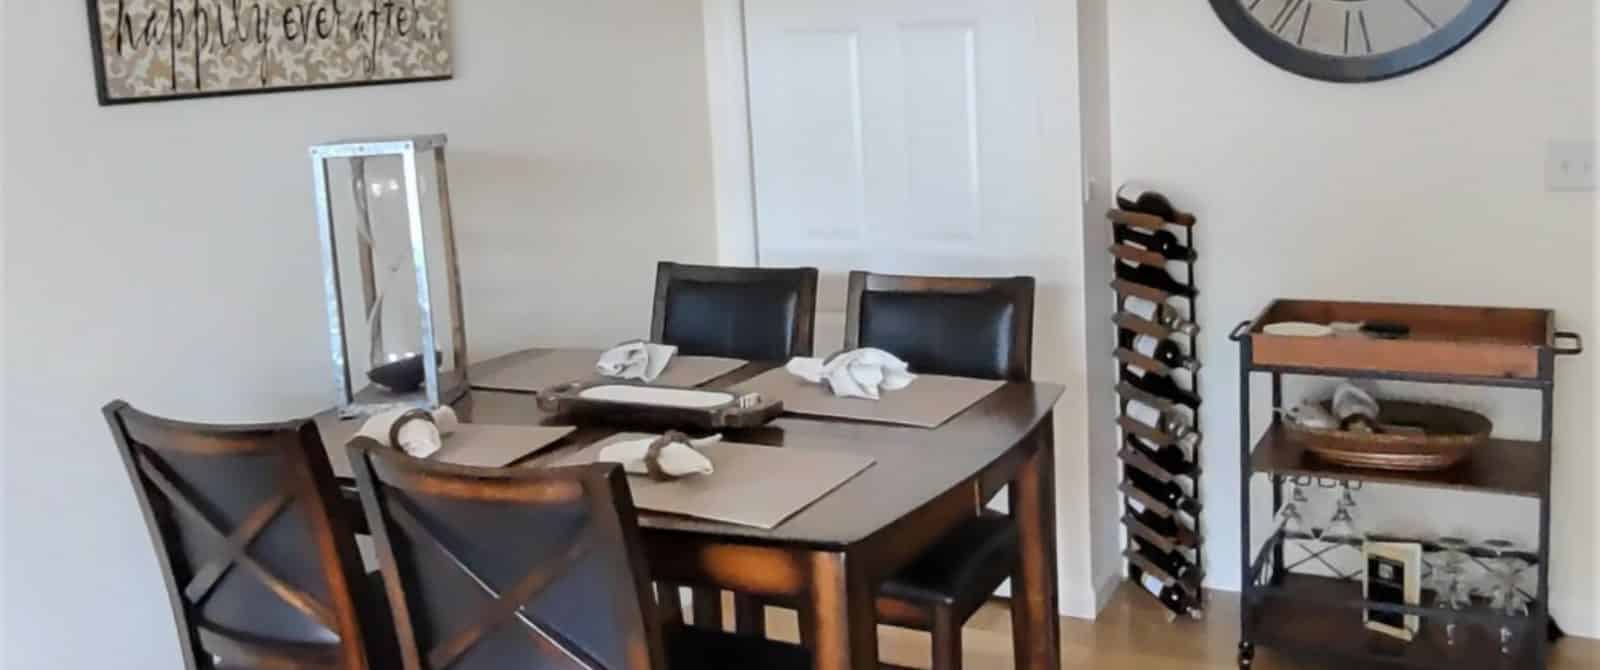 Dining area with wooden table and chairs, wine rack, and buffet cart